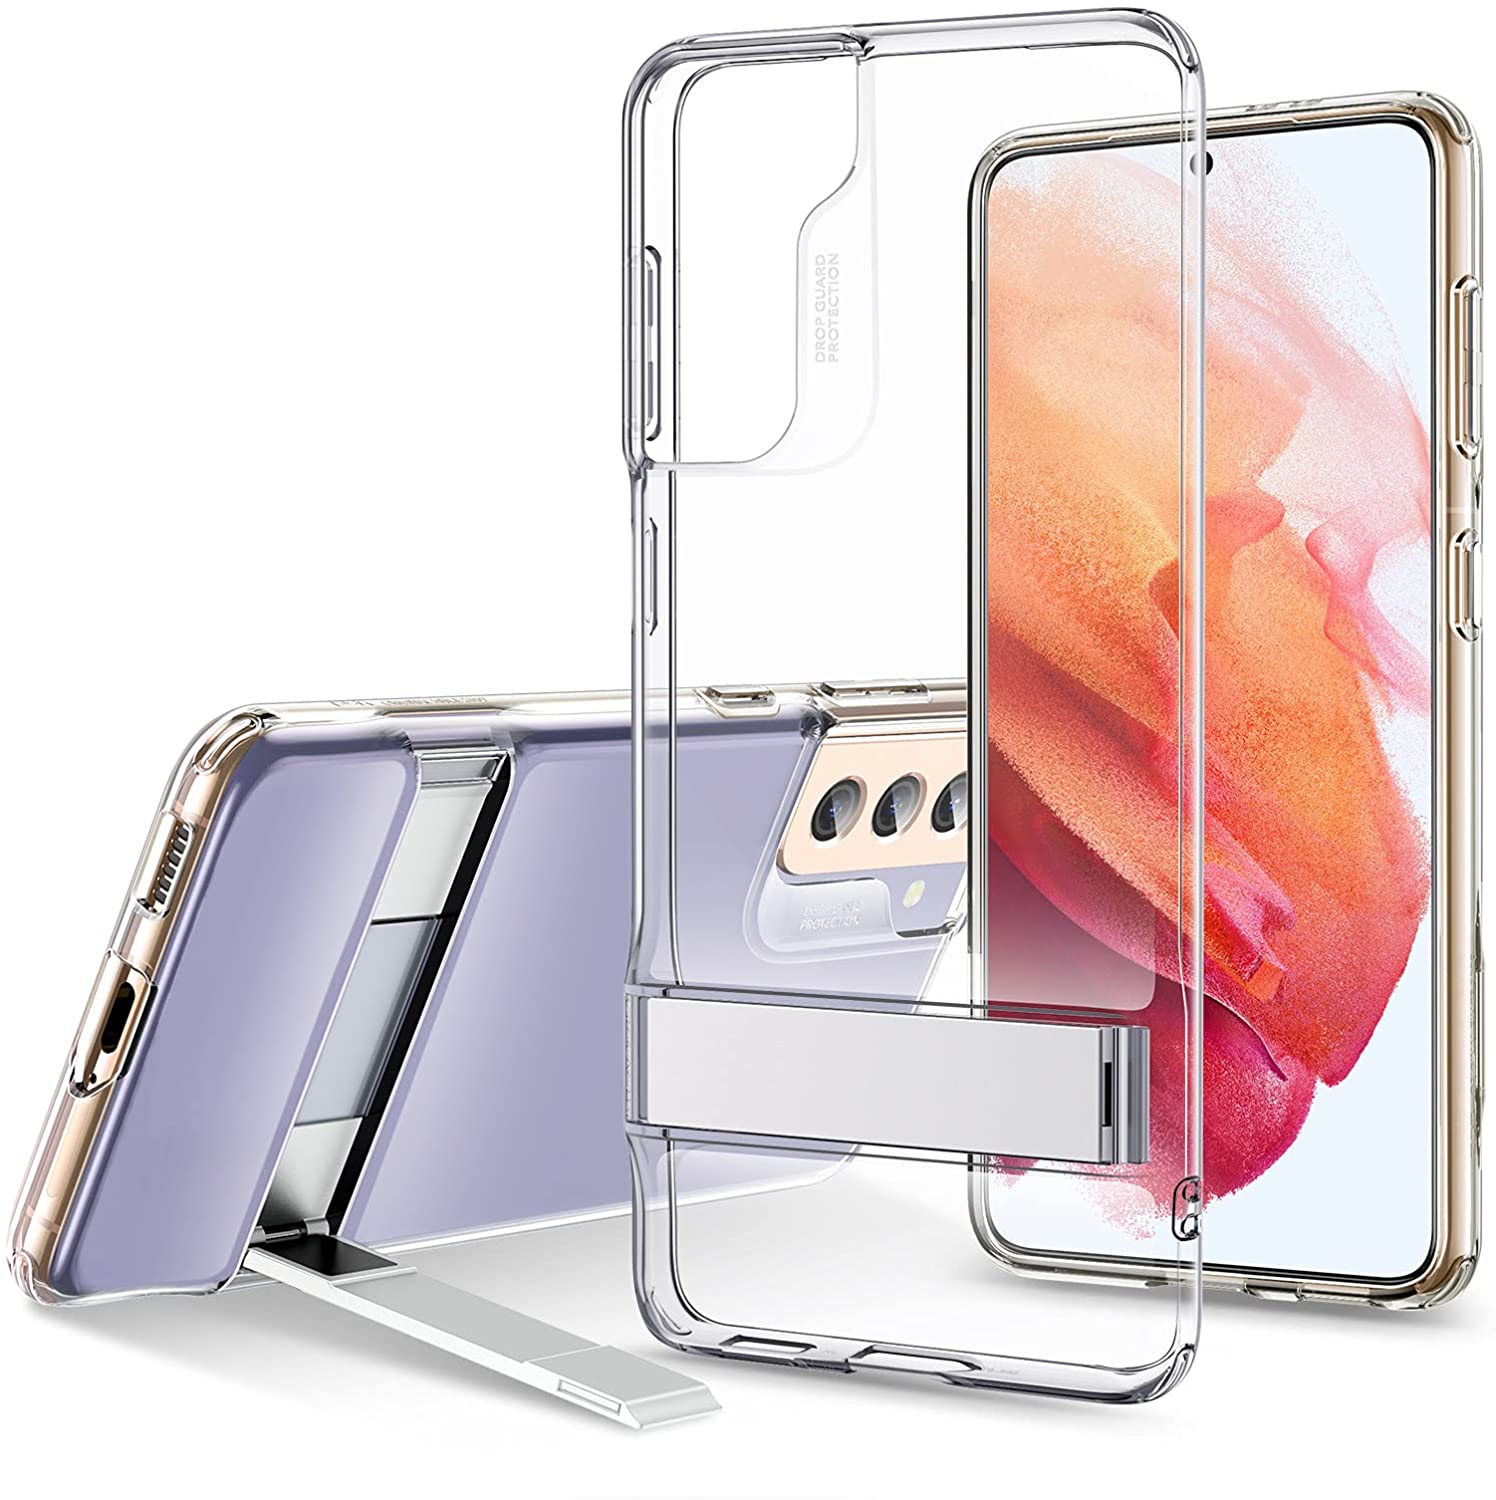 Esr clear case with built-in metal kickstand